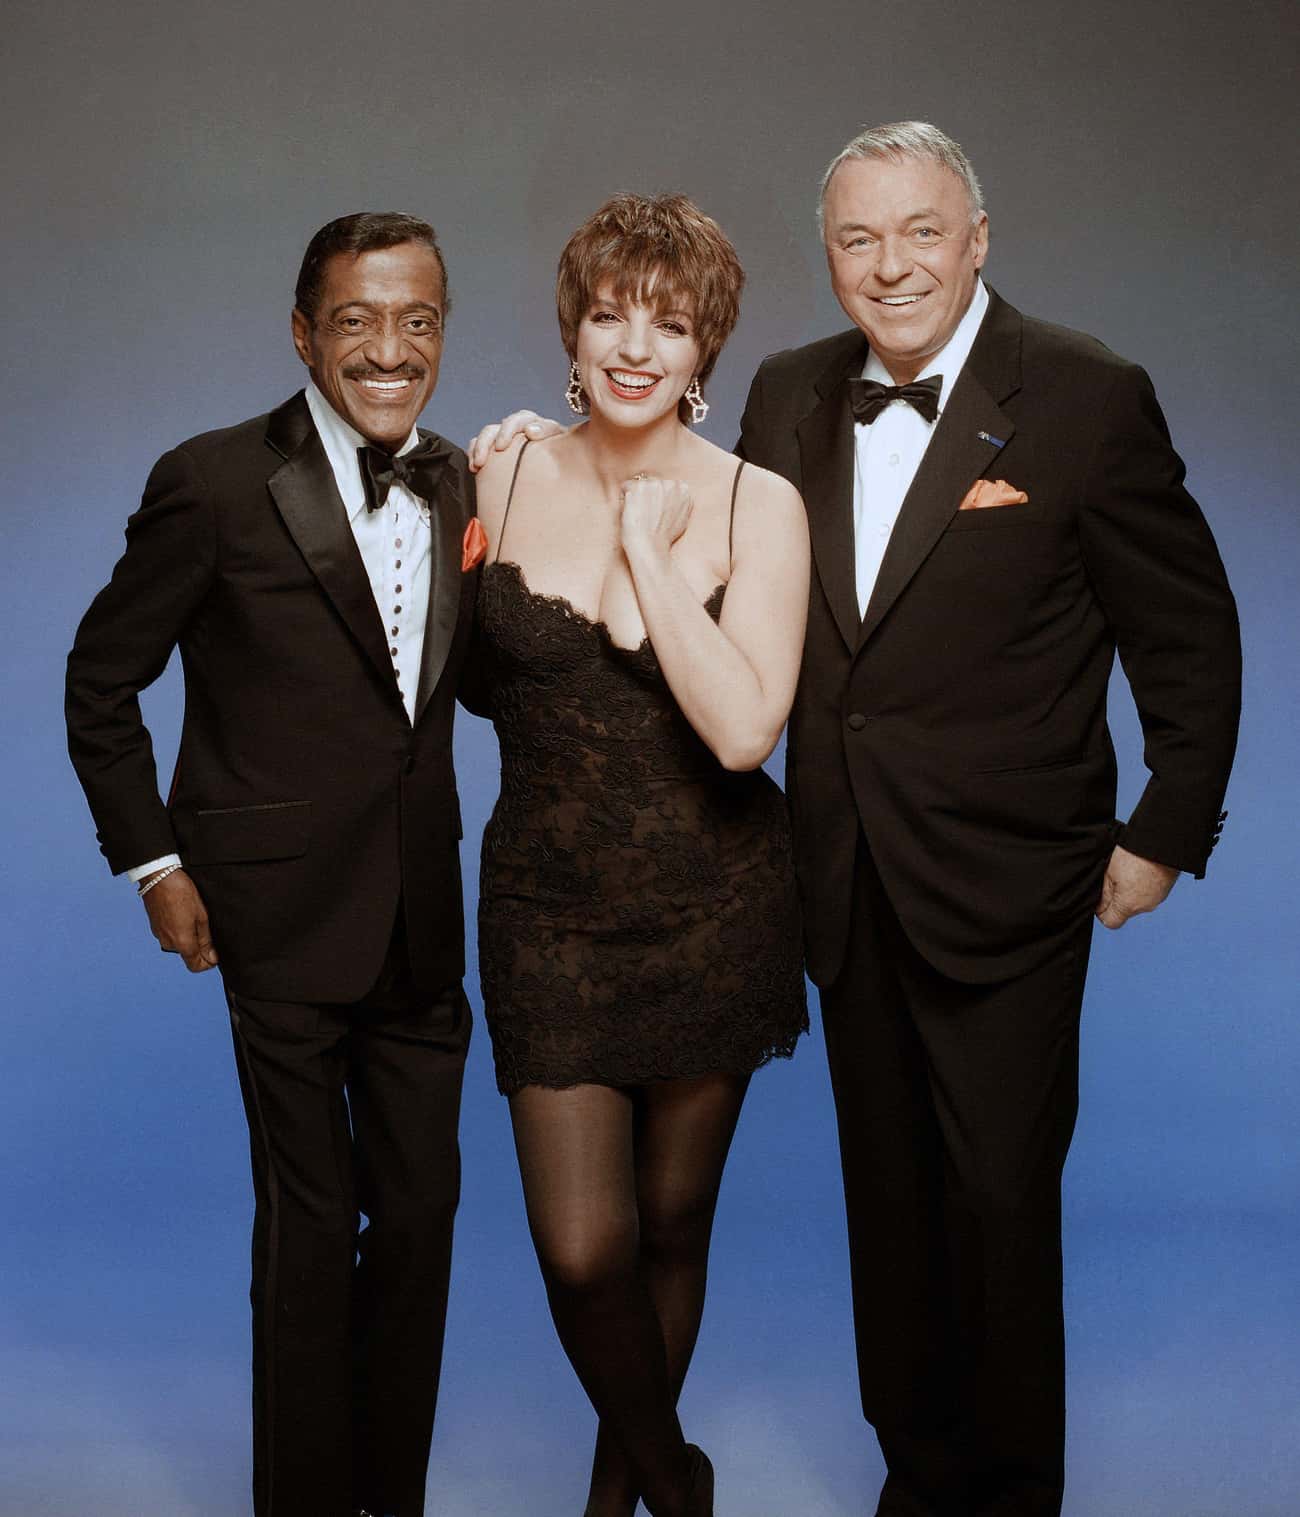 Davis Joined Liza Minnelli And Frank Sinatra On Tour In 1988